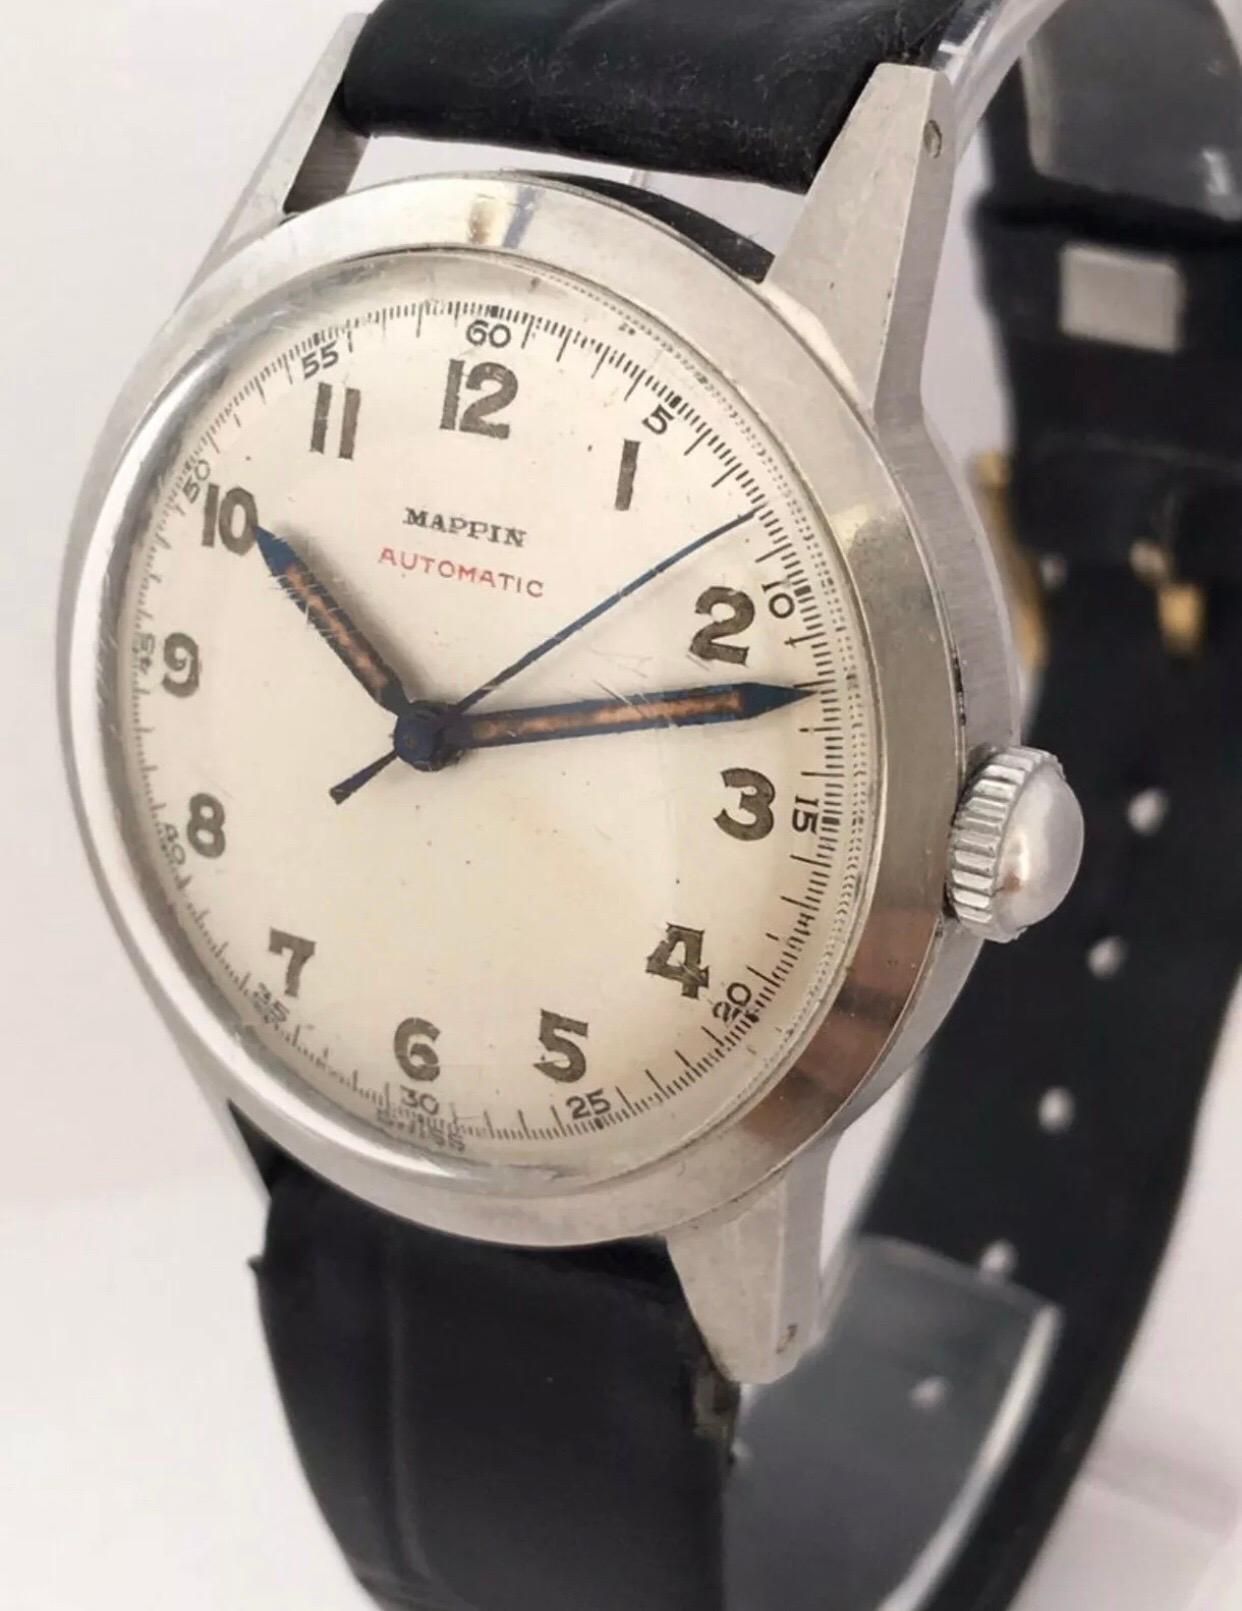 This beautiful and excellent quality pre-owned vintage watch is in good working condition and it is running well. It is made for the English market.

Visible signs of ageing and wear with small and light surface marks on the watch case as shown. The